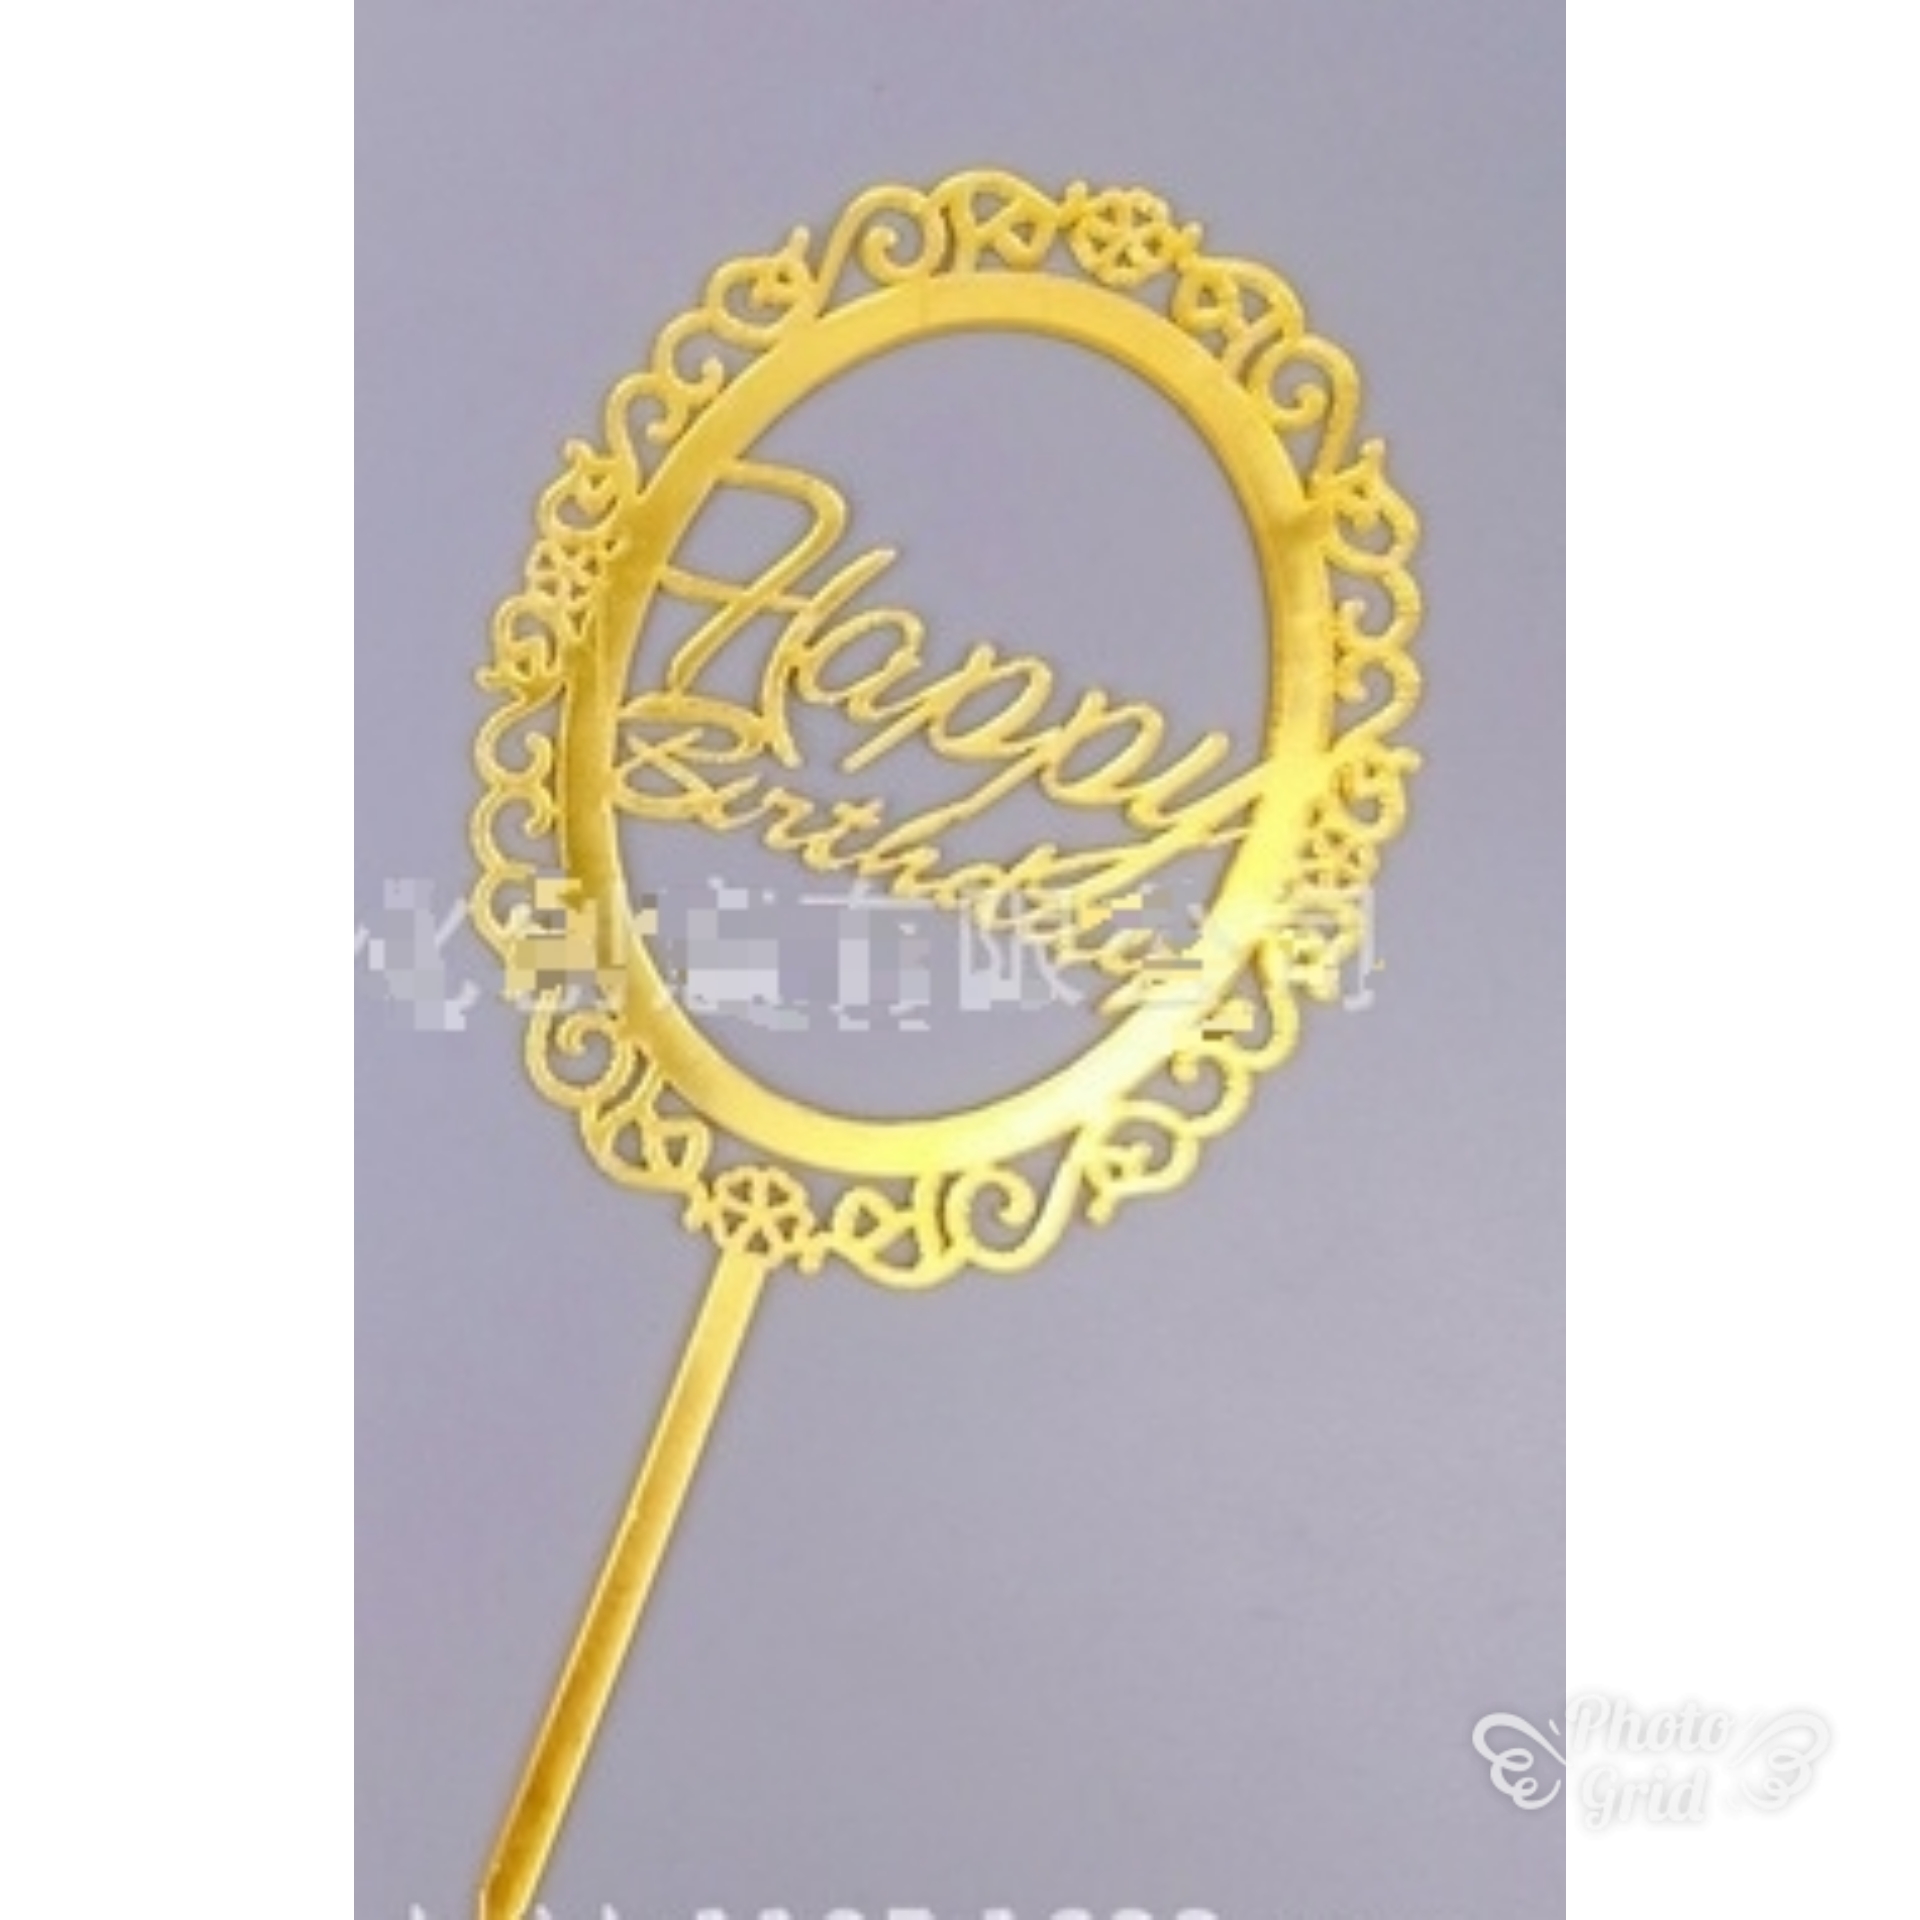 Vintage Cake Topper Acrylic Happy Birthday DIY Party Supplies Decoration 4Colors